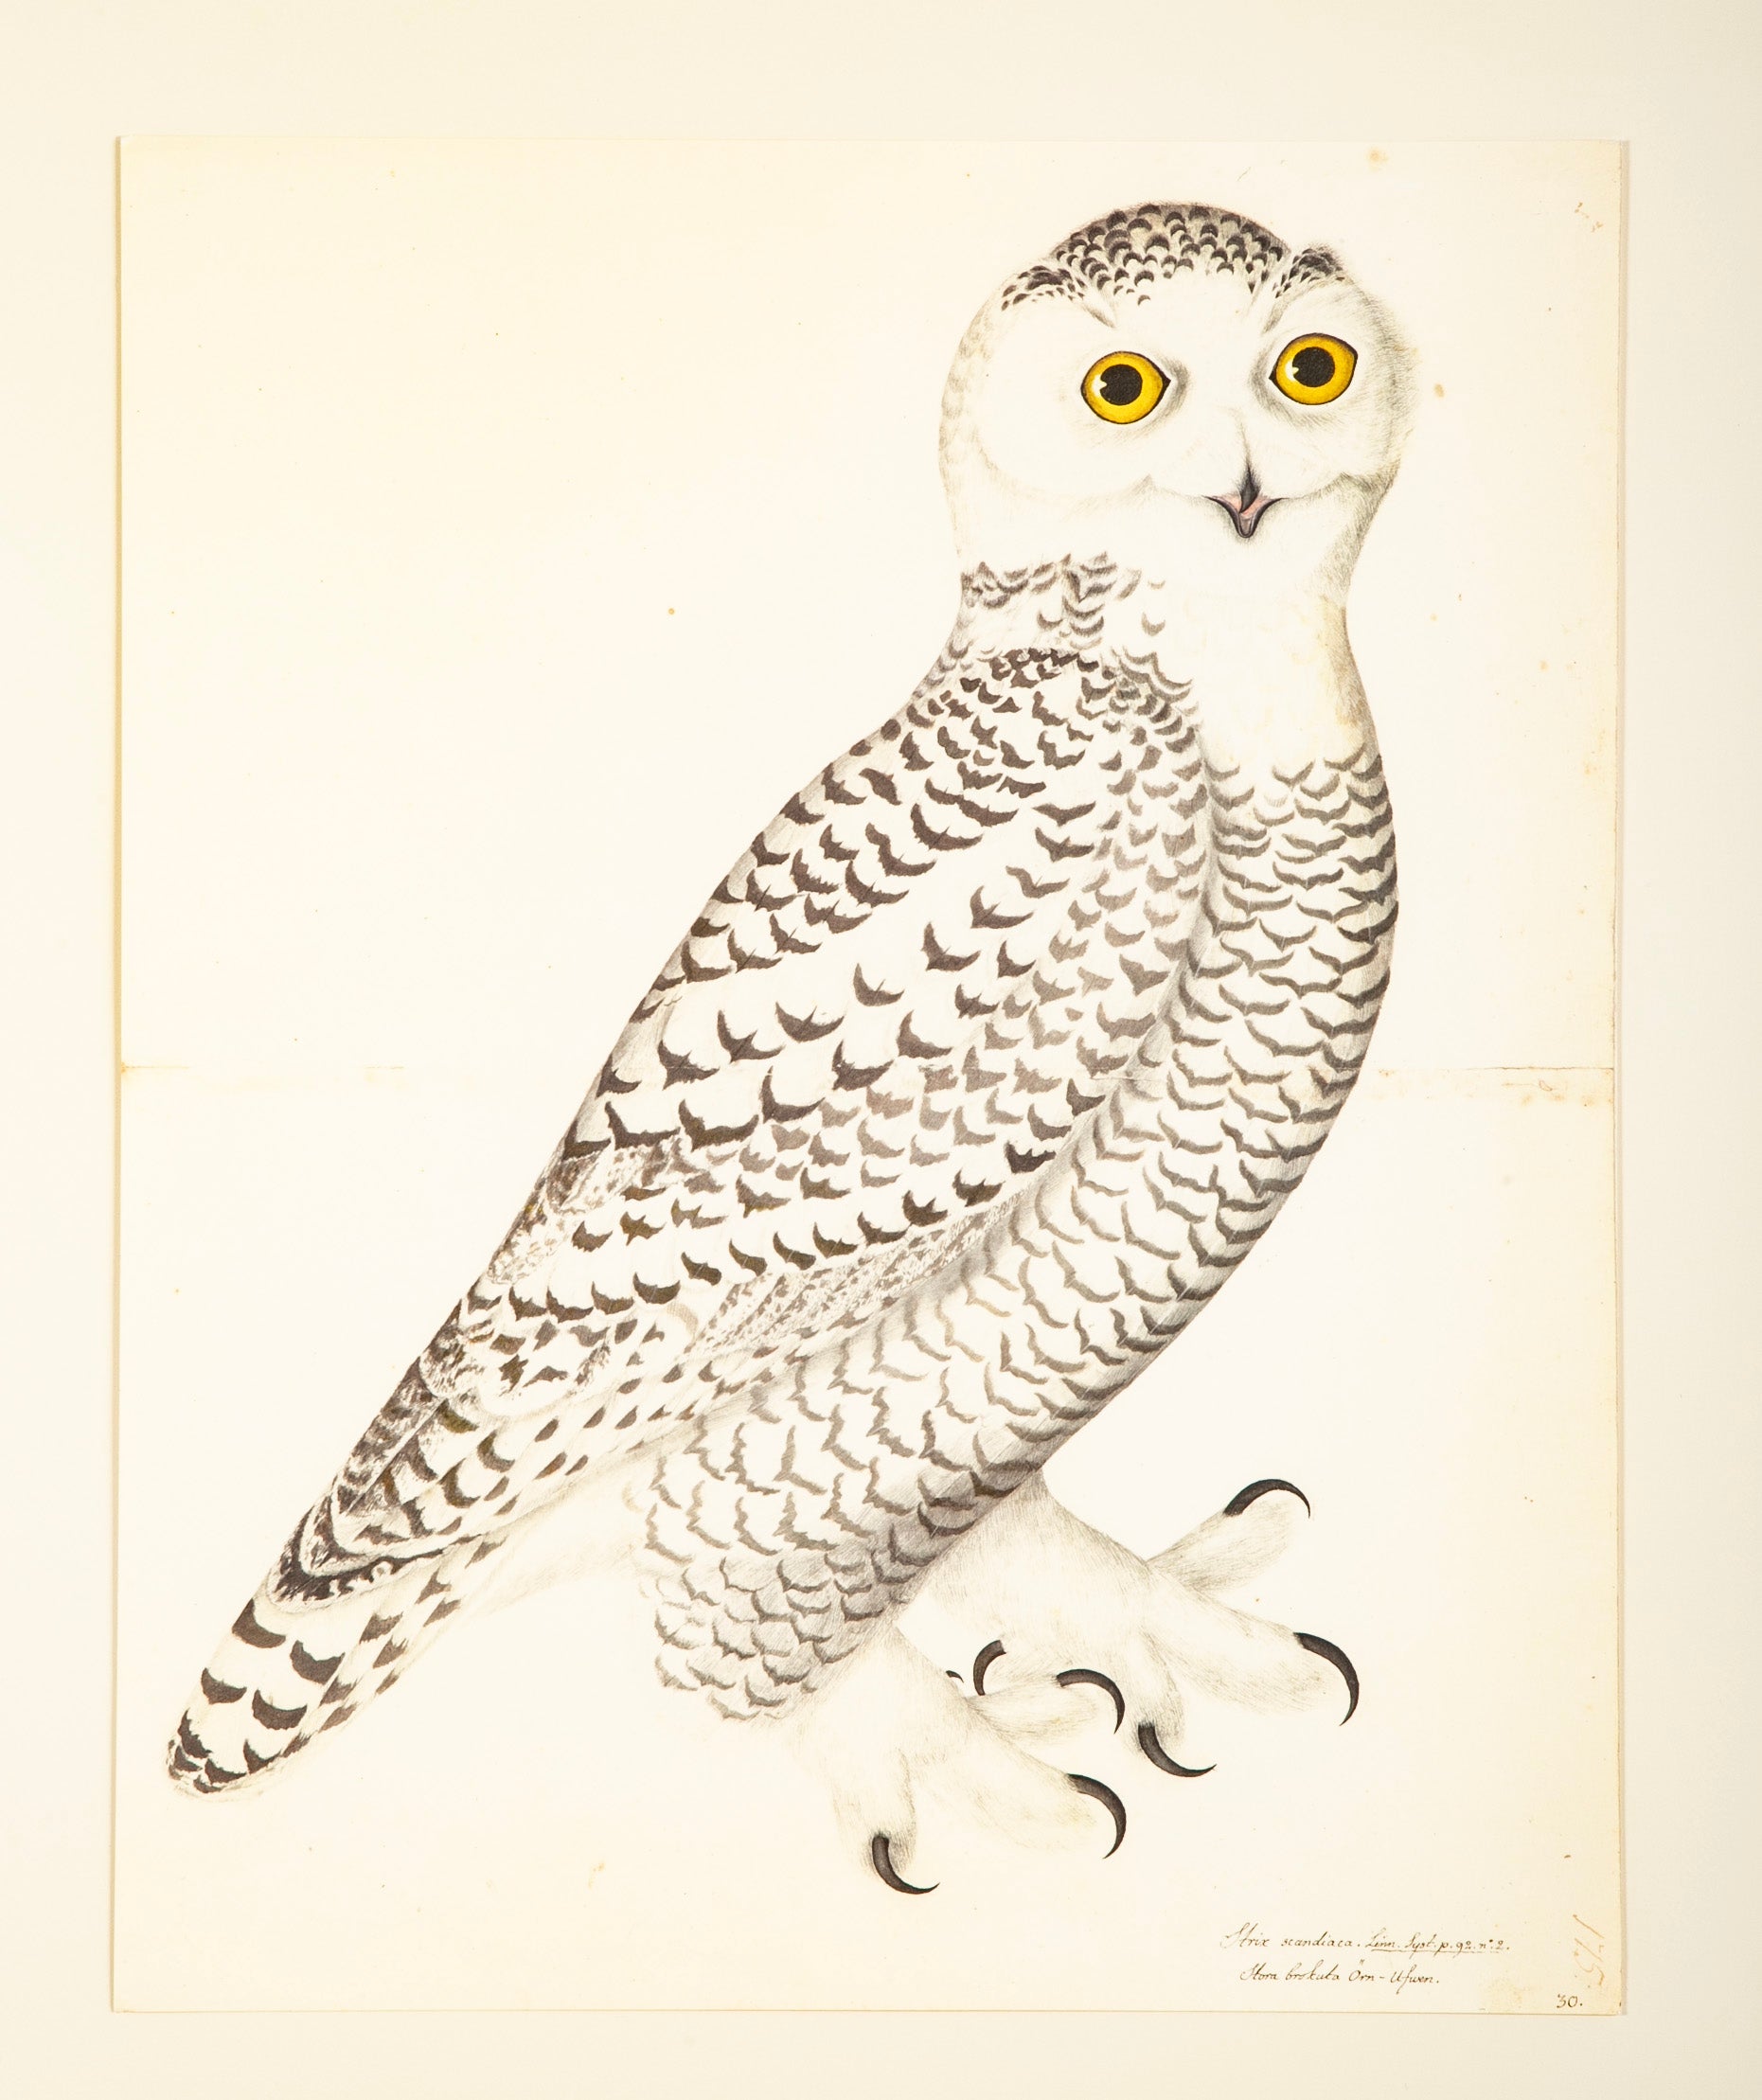 Offset Lithograph of "Side View Of White Owl" from the "The Great Bird Book" by Olaf Rudbeck The Younger (1660-1740)